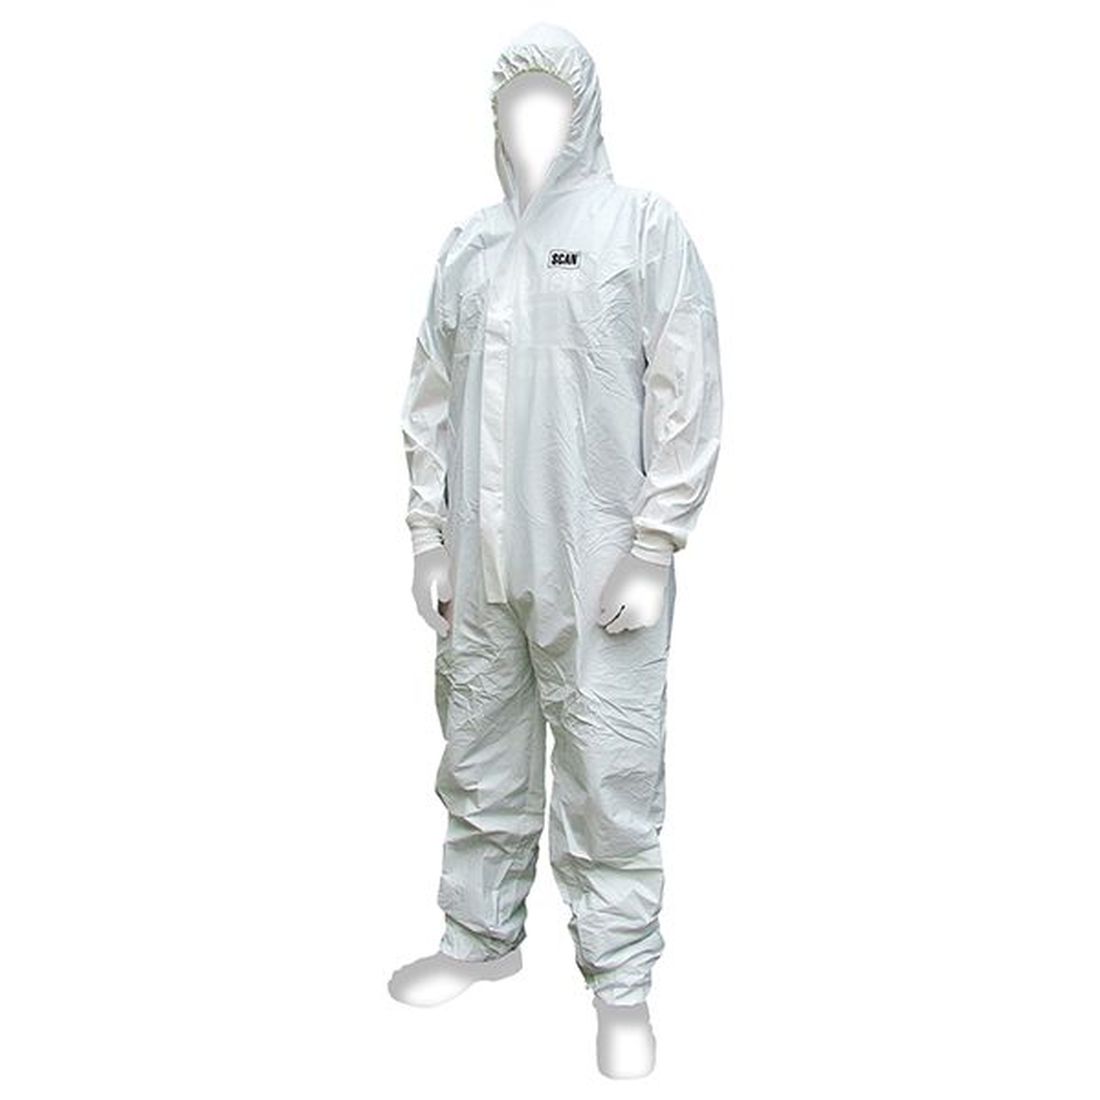 Scan Chemical Splash Resistant Disposable Coverall White Type 5/6 XL (42-45in)       